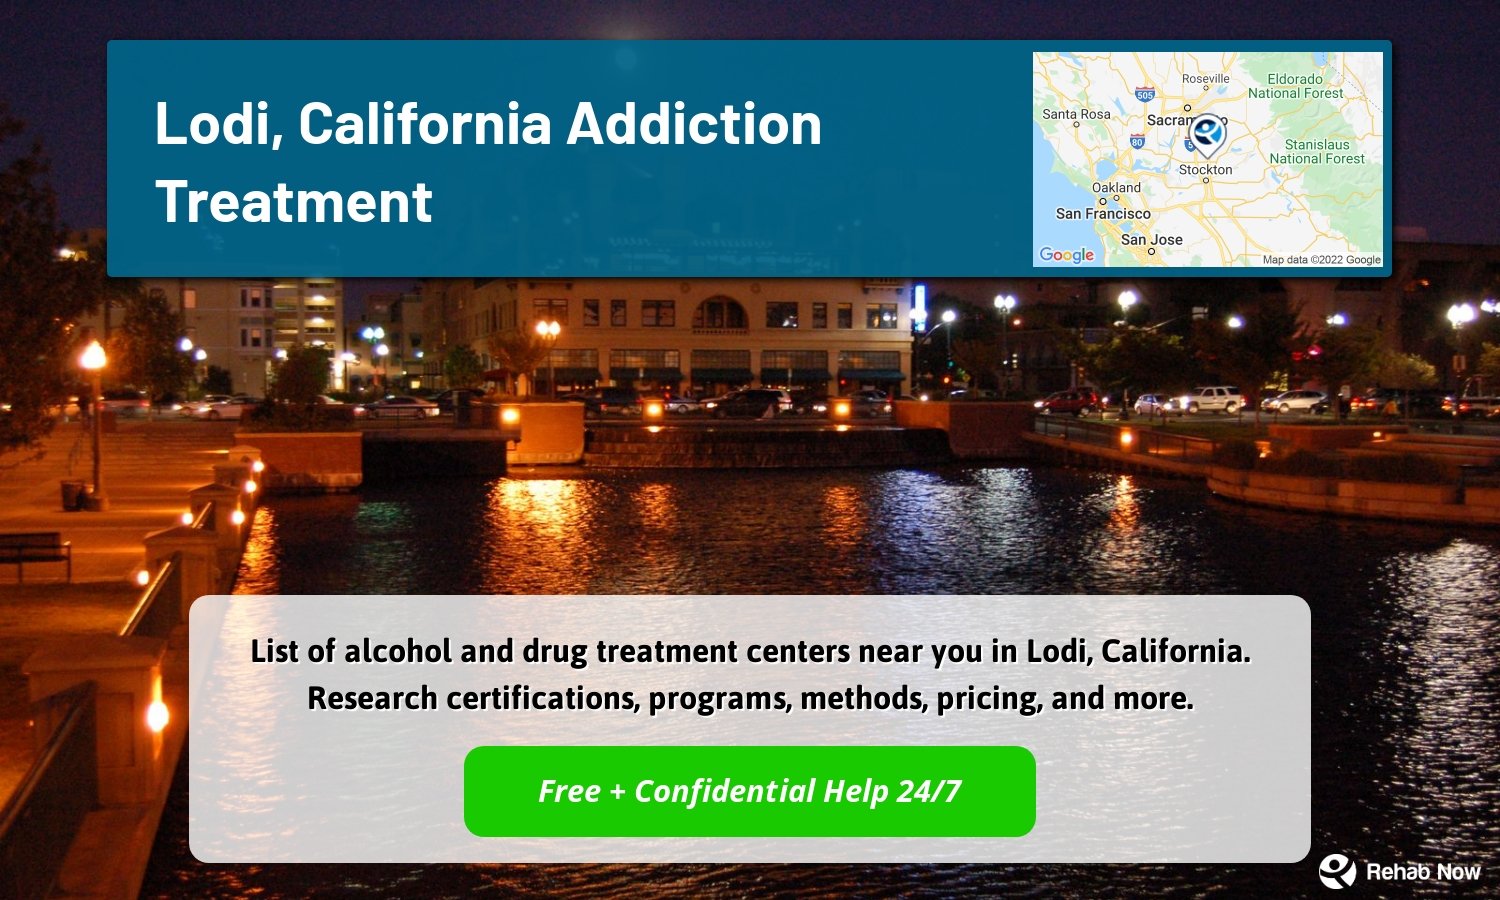 List of alcohol and drug treatment centers near you in Lodi, California. Research certifications, programs, methods, pricing, and more.